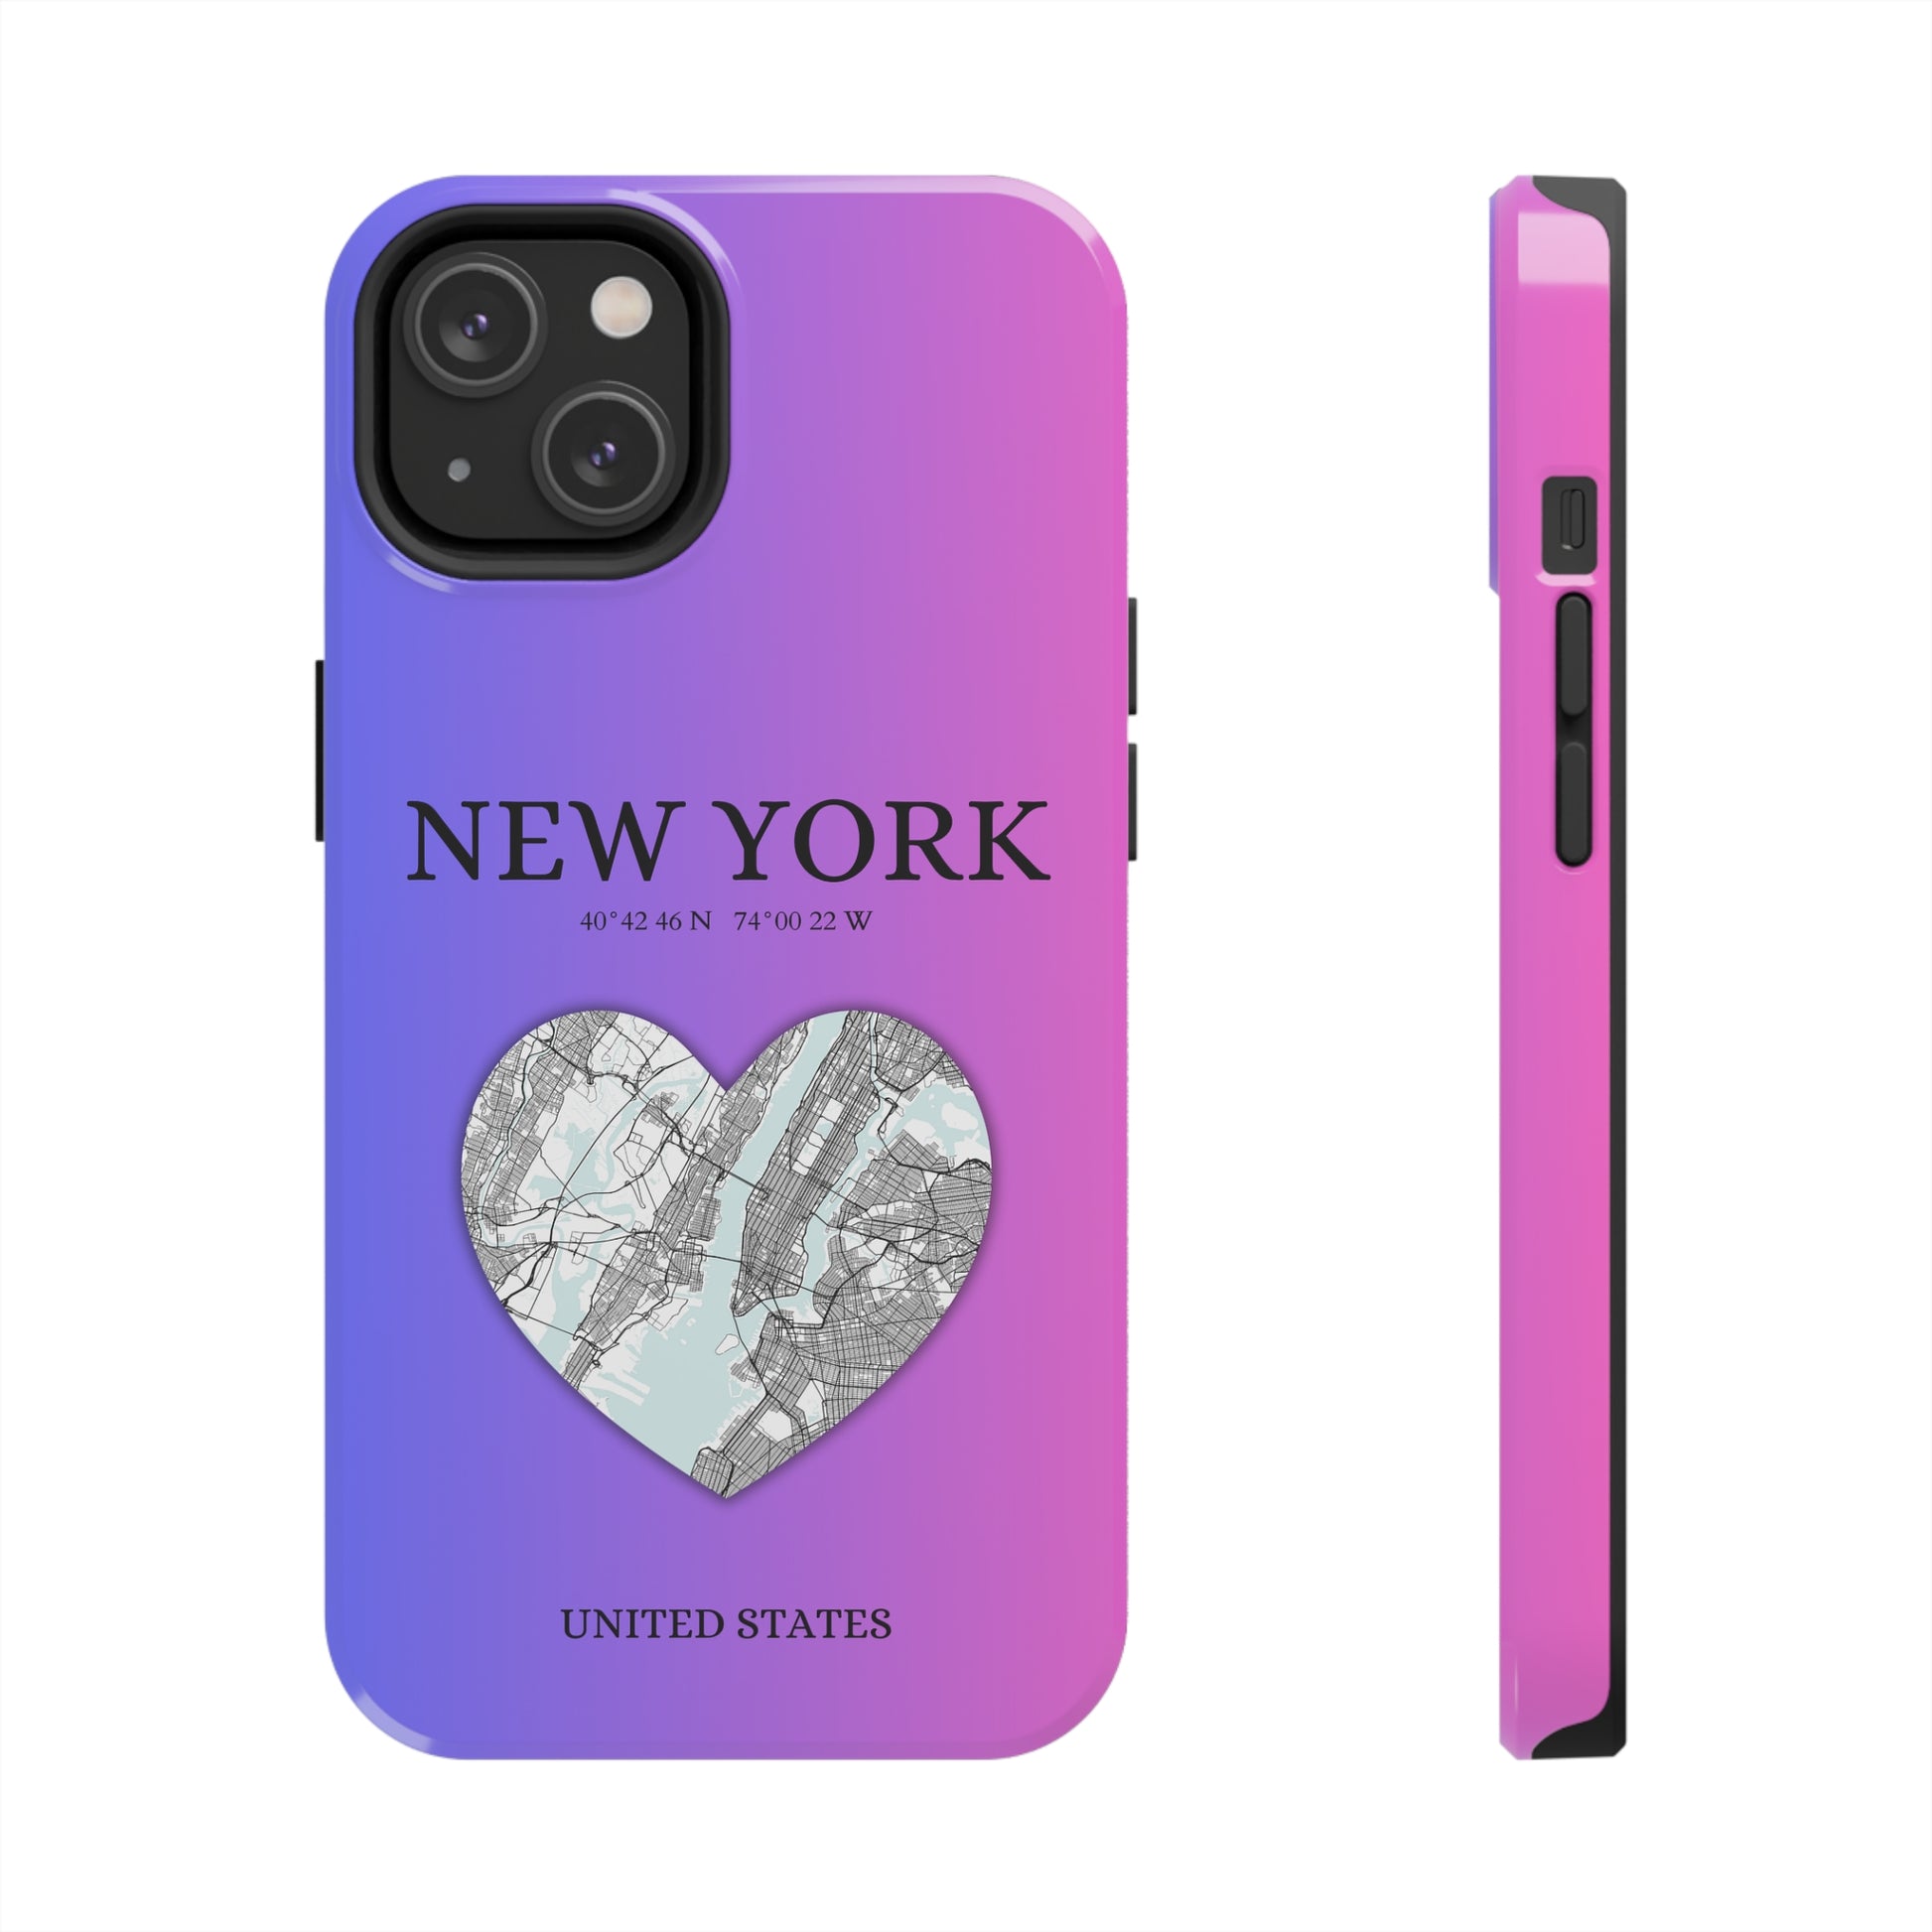 Elevate your iPhone with RimaGallery's New York Heartbeat case. Sleek design meets durability for stylish protection. Free US shipping.-York Heartbeat - Magenta (iPhone Case 11-15)